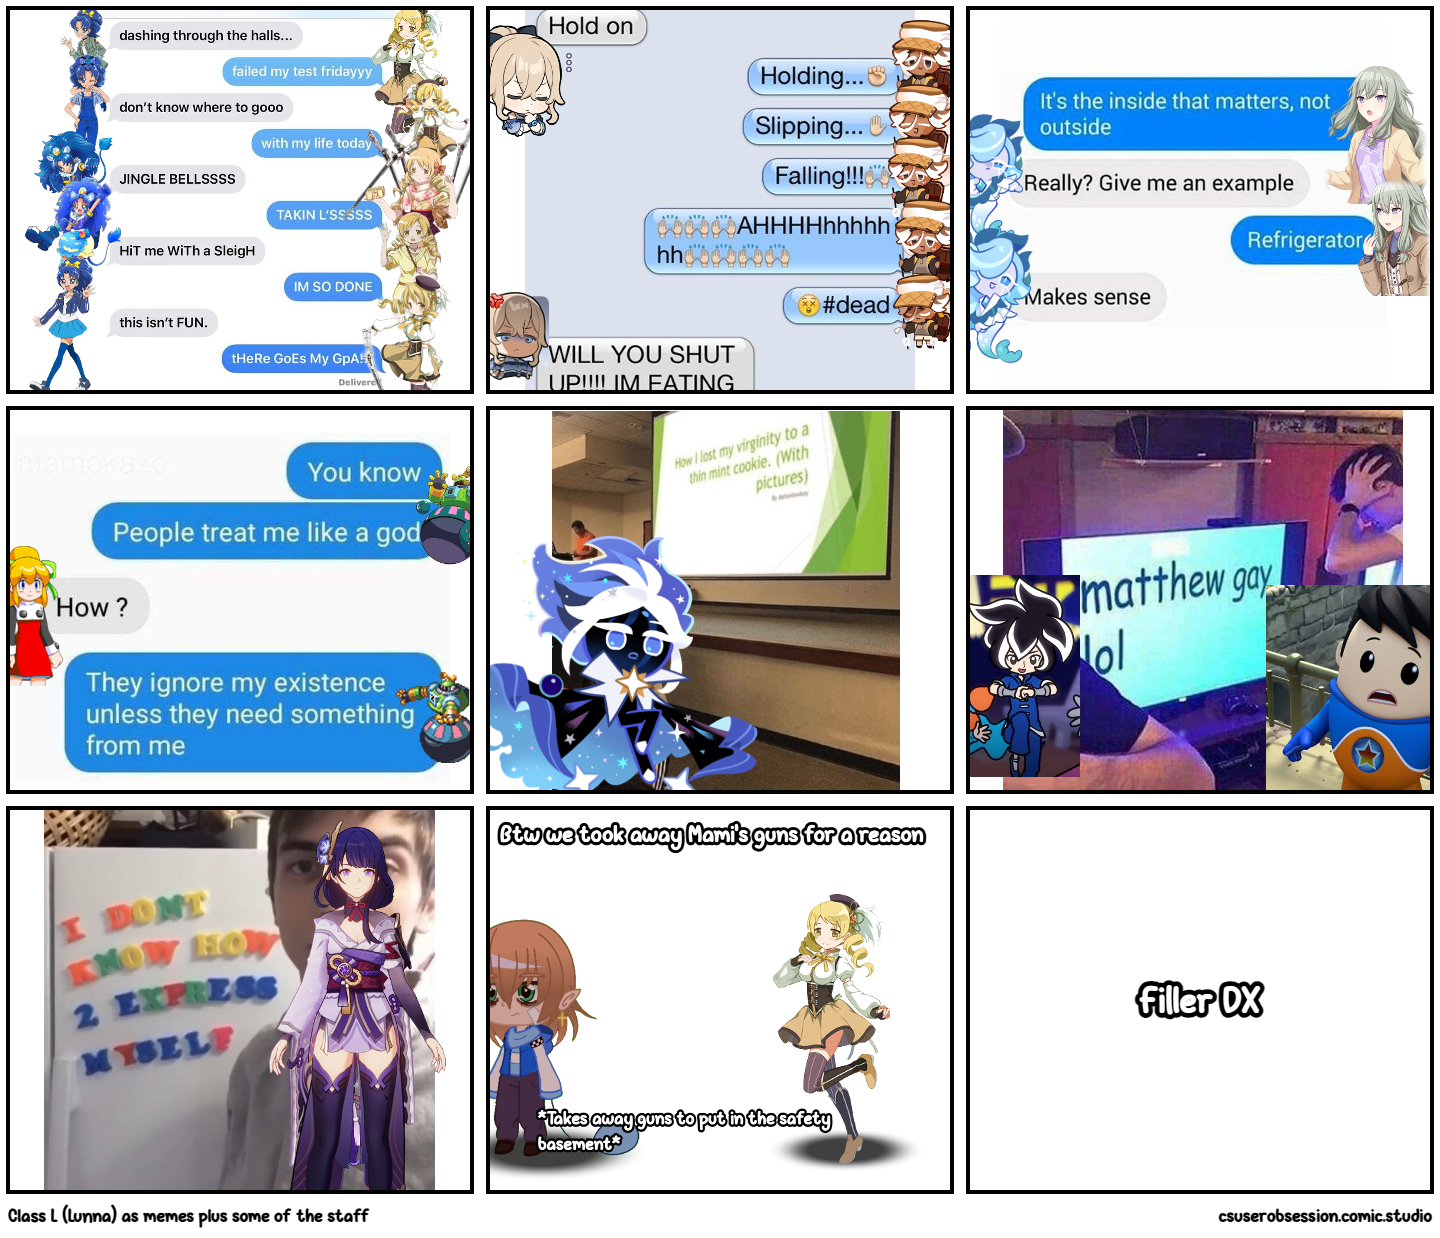 Class L (Lunna) as memes plus some of the staff